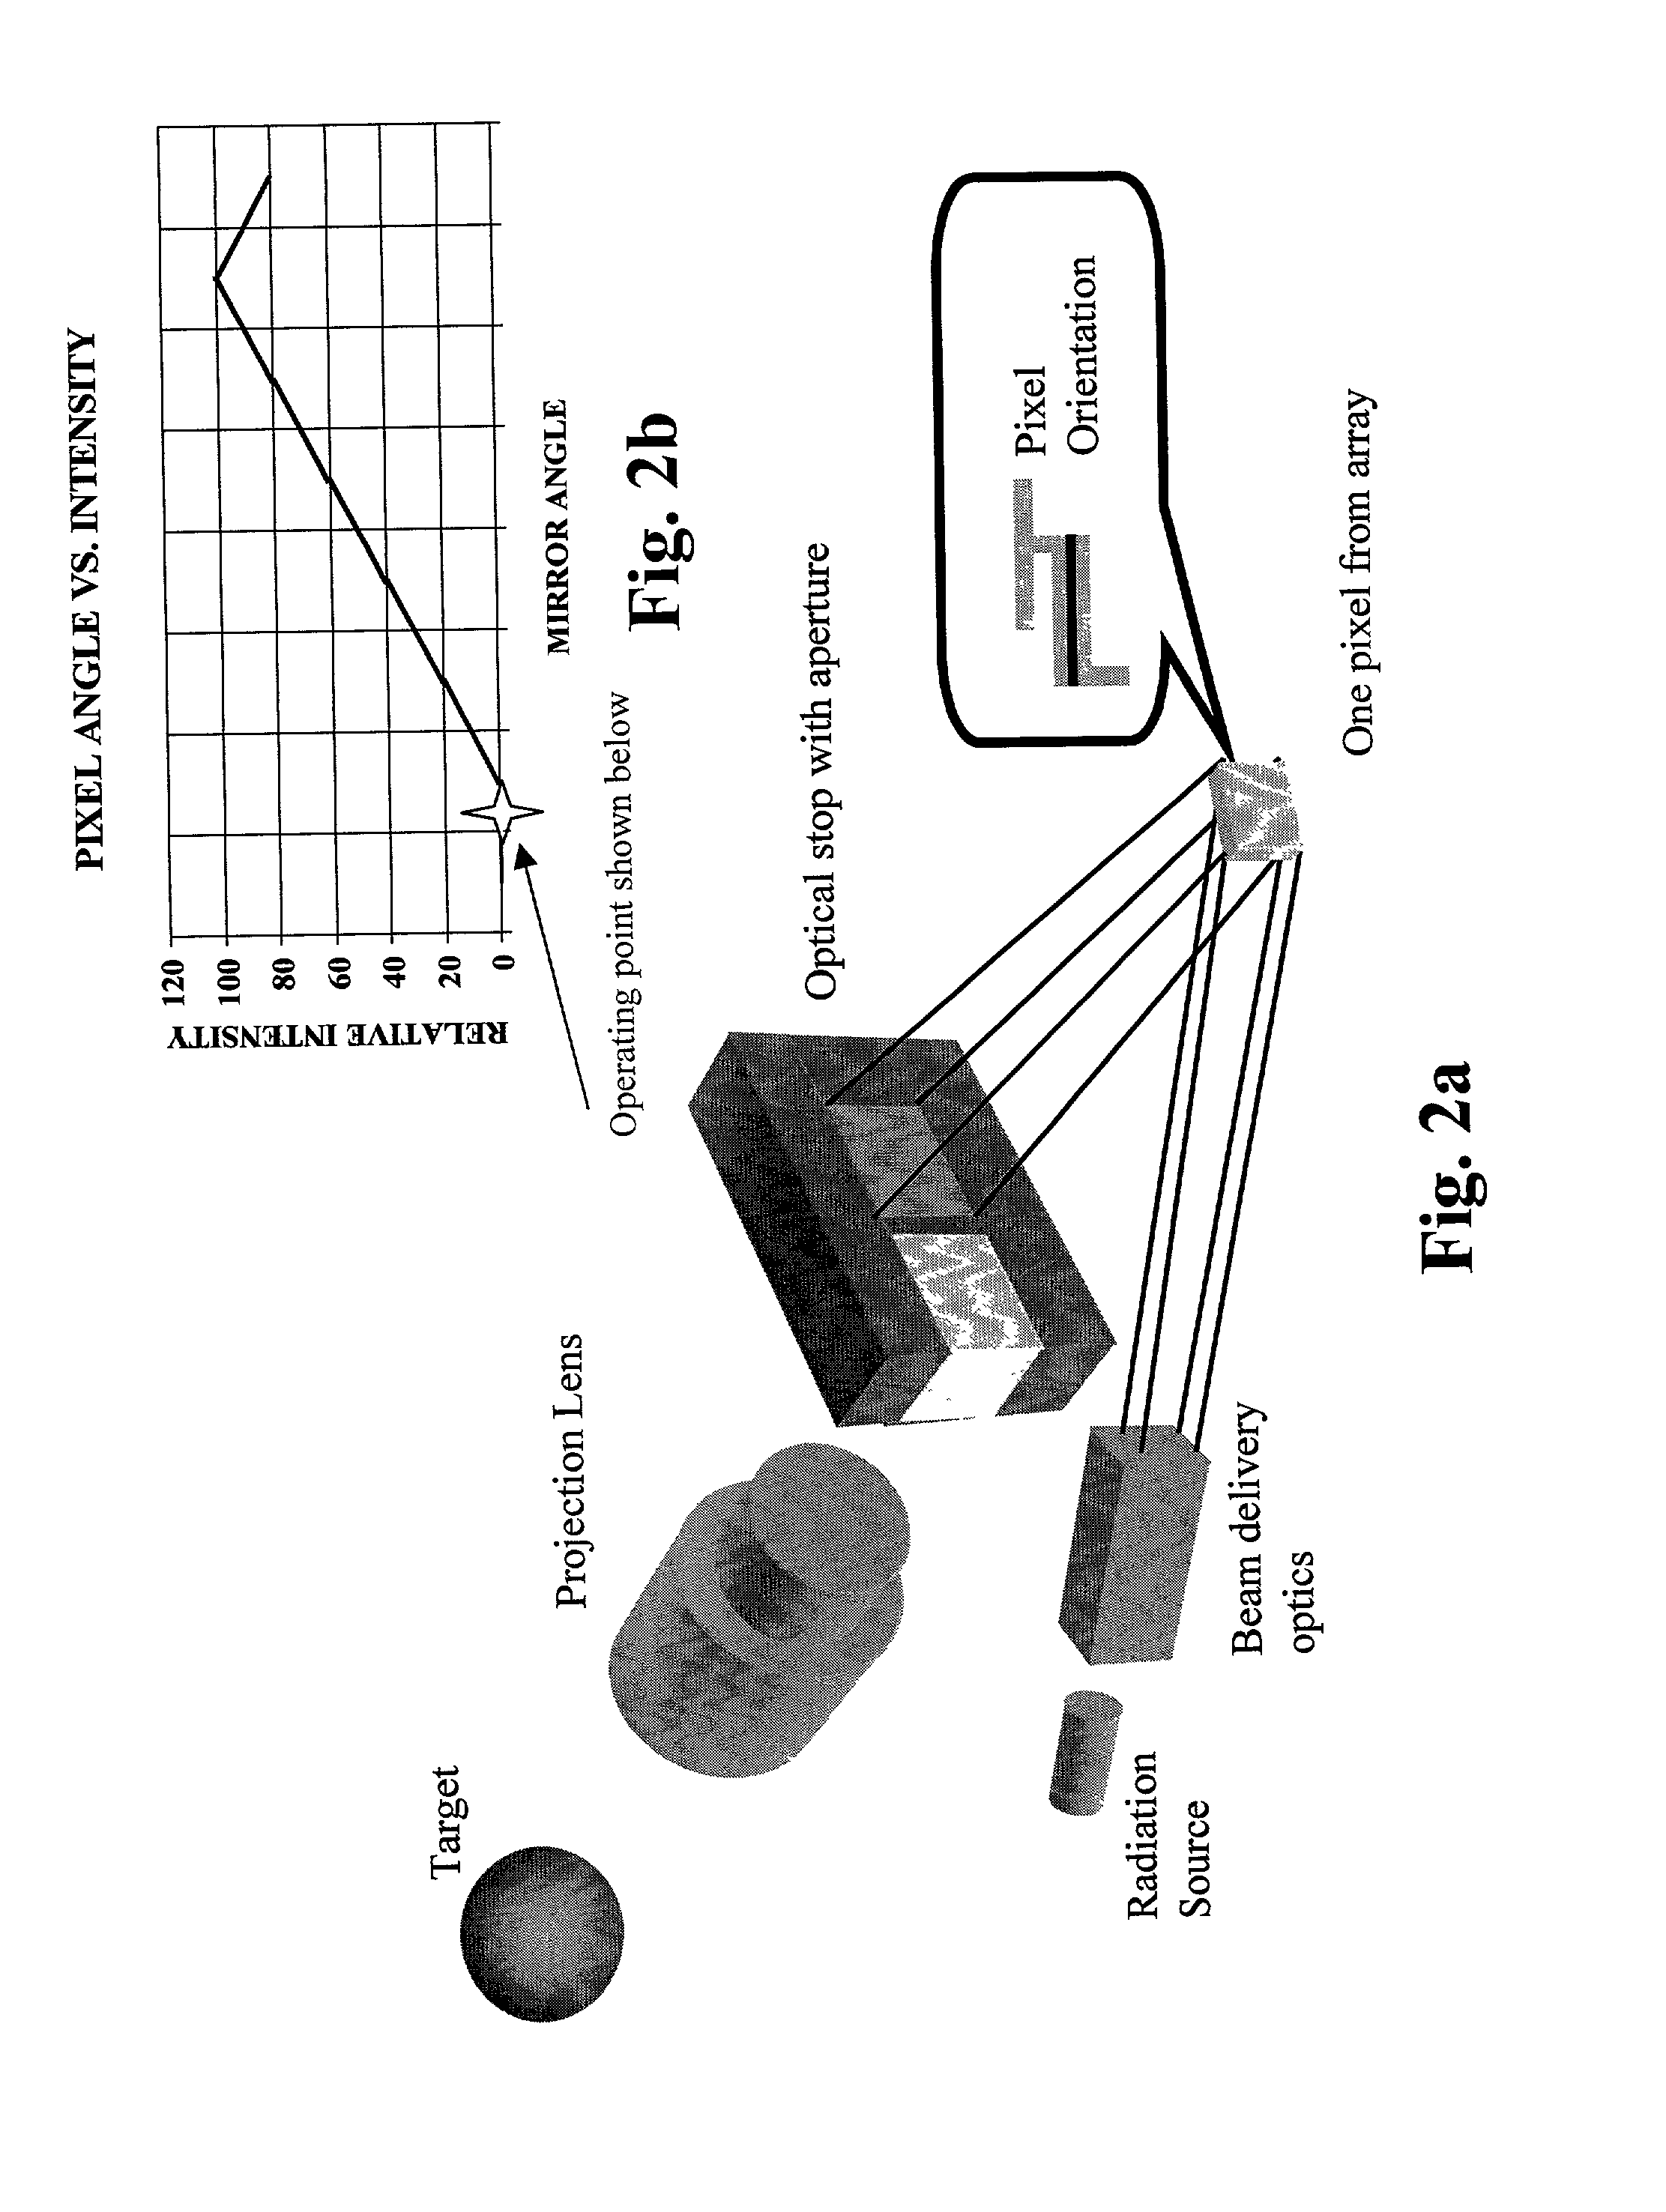 Maskless laser beam patterning device and apparatus for ablation of multilayered structures with continuous monitoring of ablation